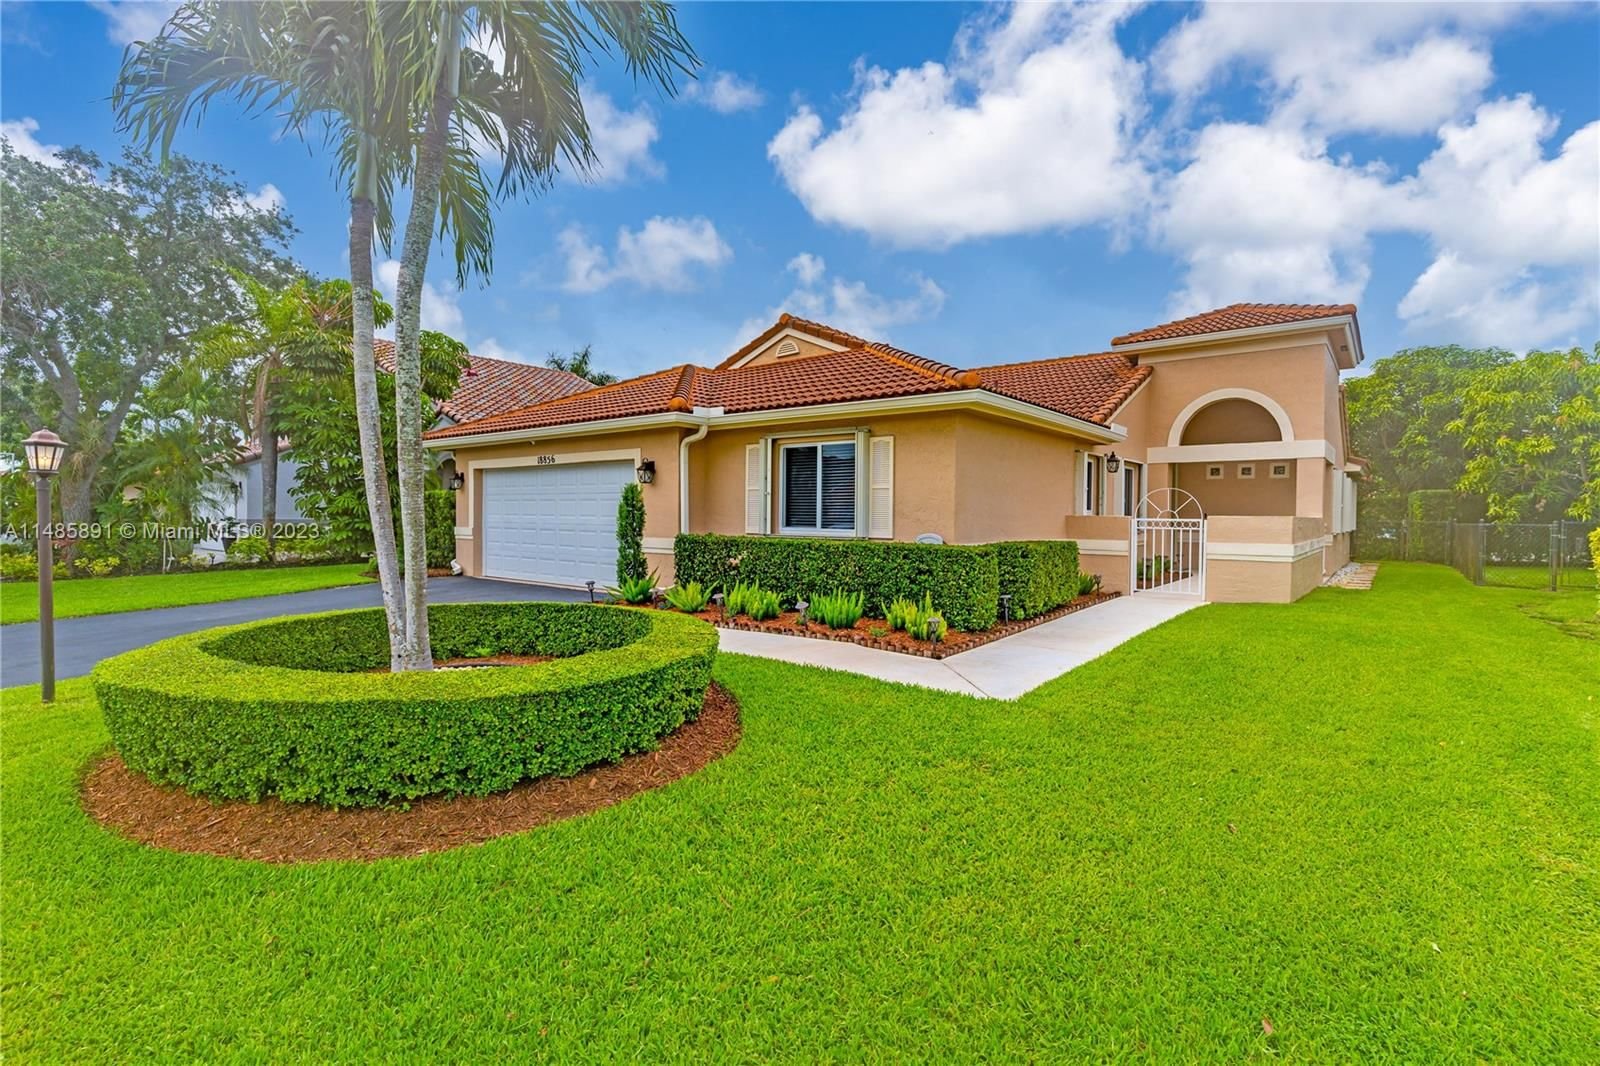 Real estate property located at 18856 2nd St, Broward County, Pembroke Pines, FL